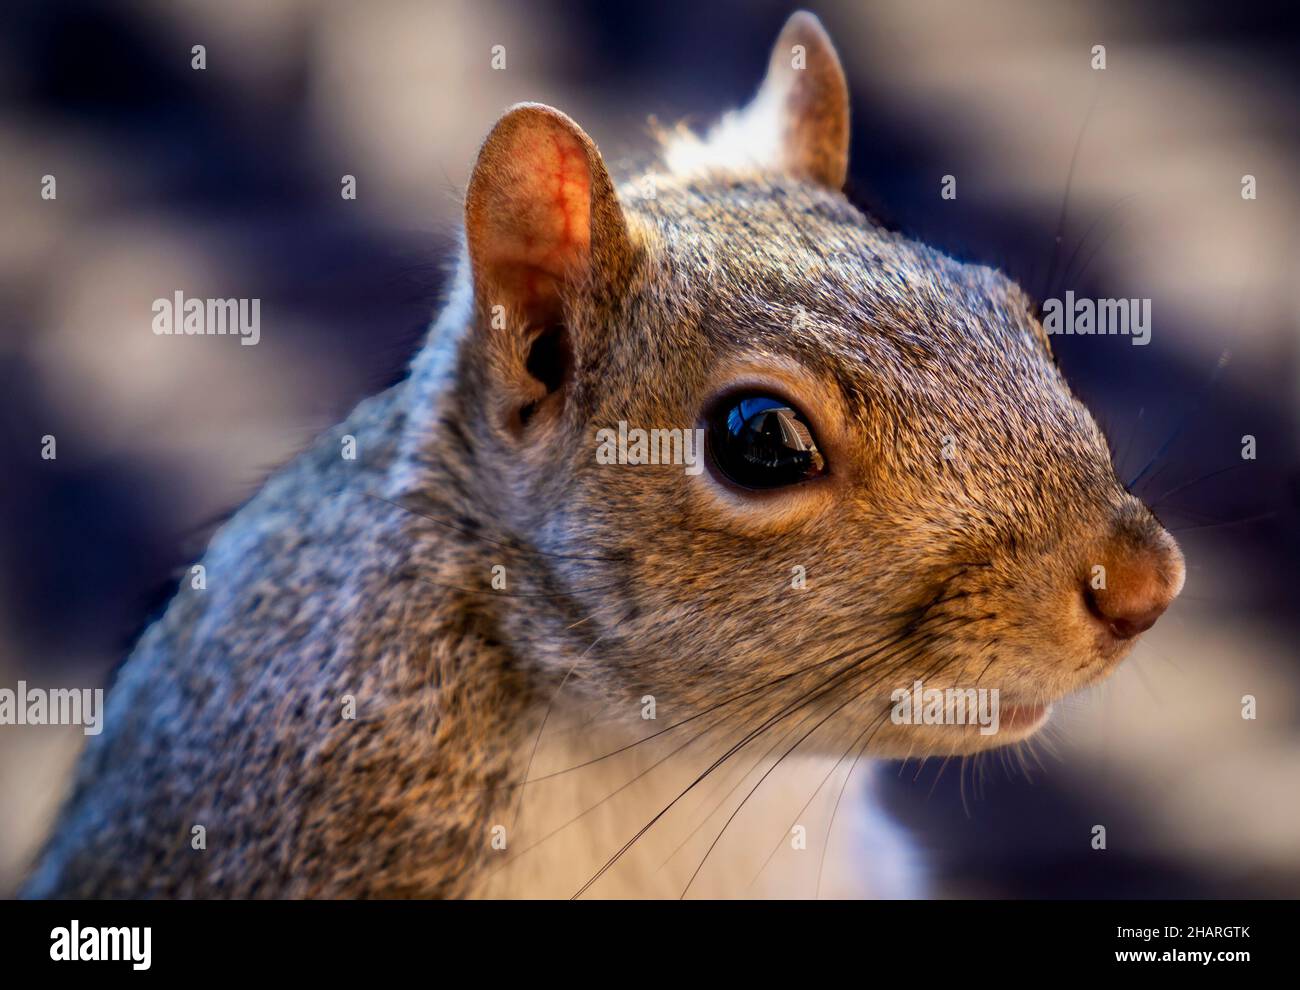 Close up of a Squirrel on the backyard deck Stock Photo